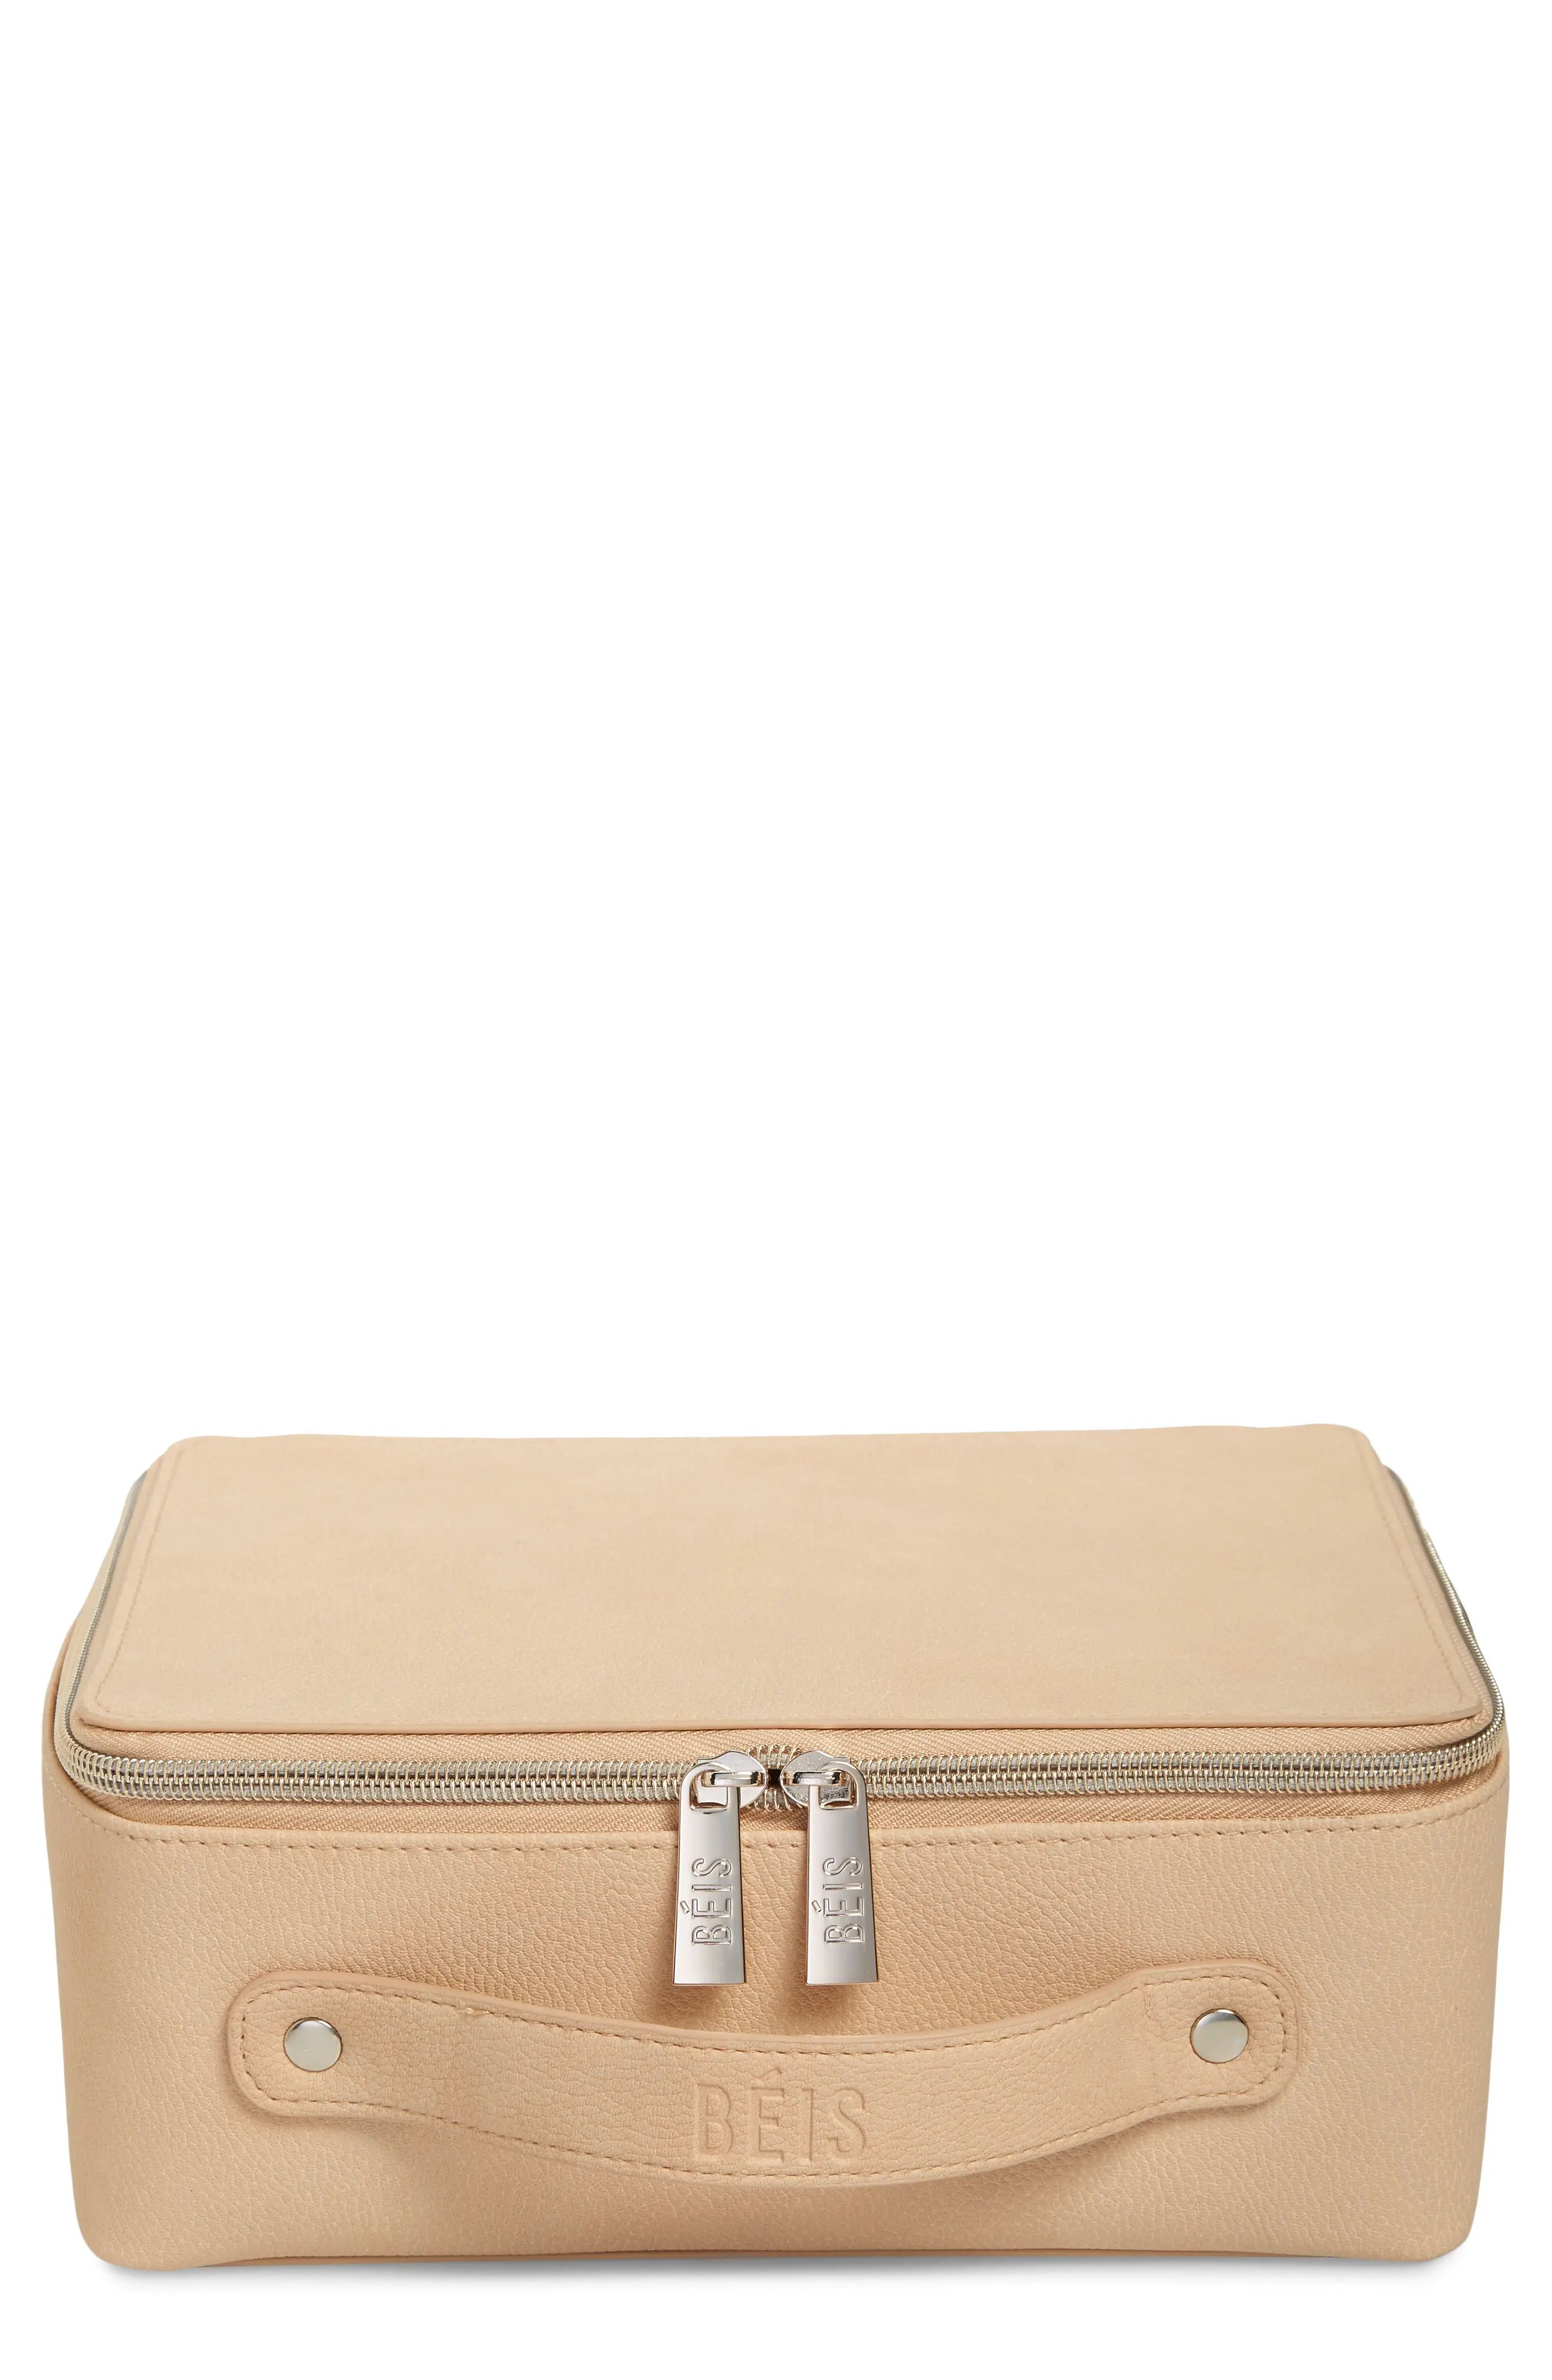 Beis The Cosmetics Case, Size One Size - Beige | Nordstrom